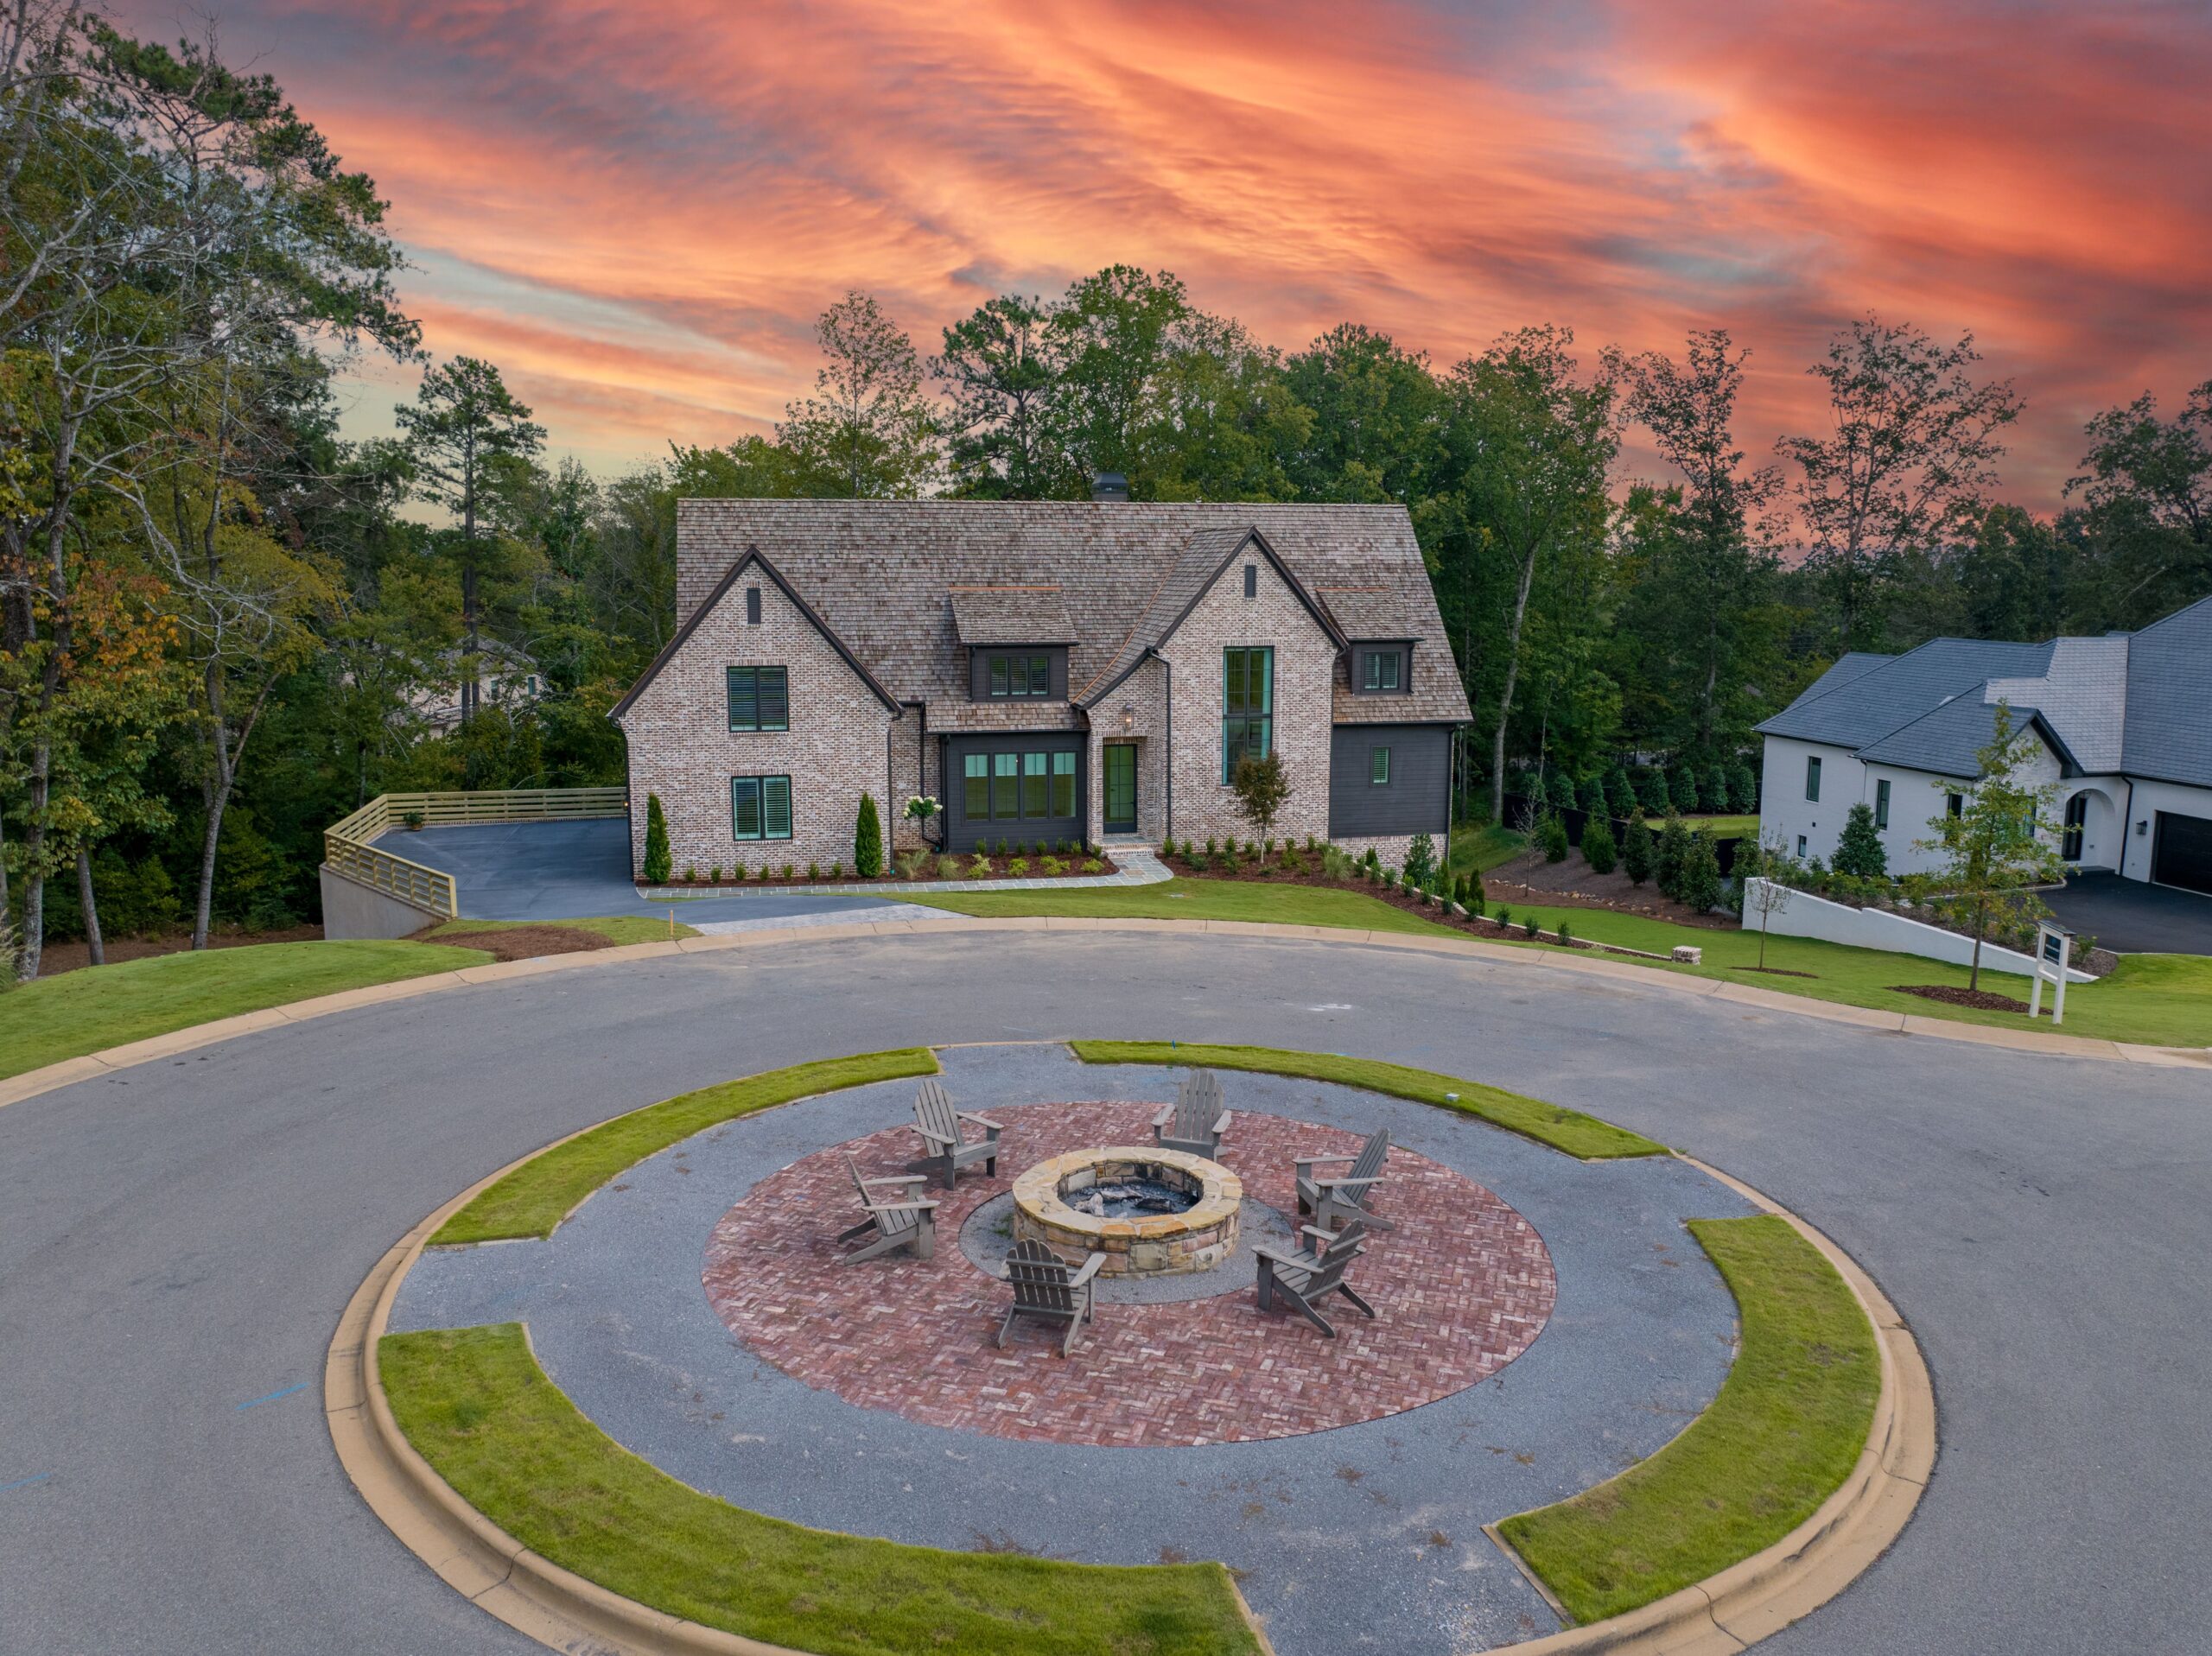 A circular driveway with fire pit in the center.